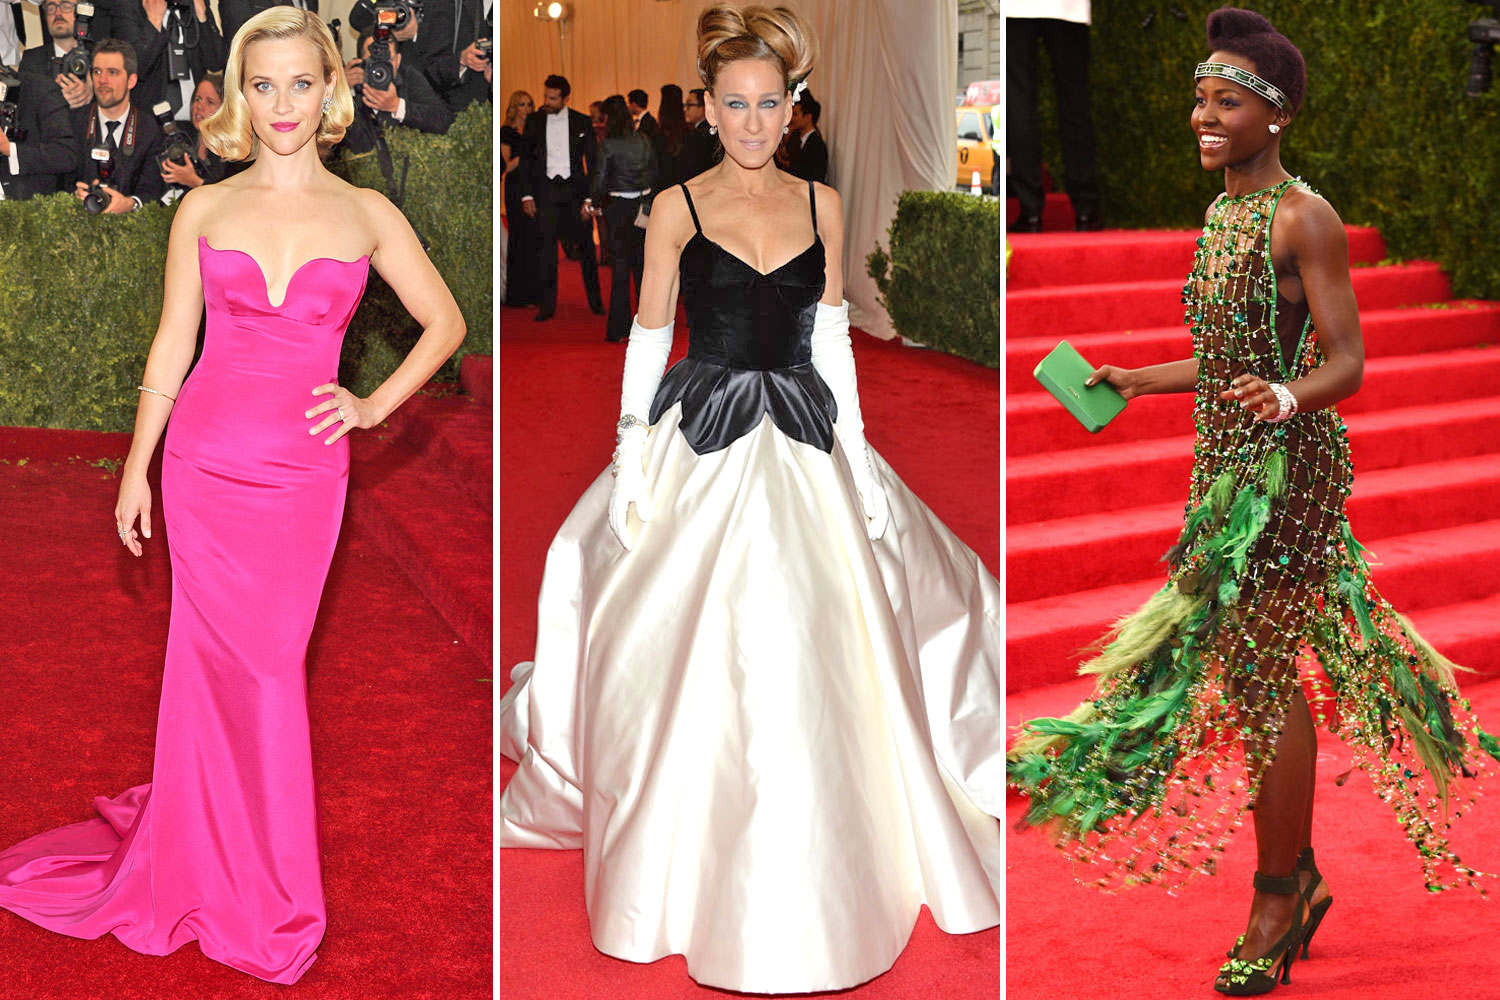 From left: Reese Witherspoon, Sarah Jessica Parker, and Lupita Nyong'o attend The Metropolitan Museum of Art's Costume Institute benefit gala celebrating "Charles James: Beyond Fashion" on May 5, 2014, in New York City.